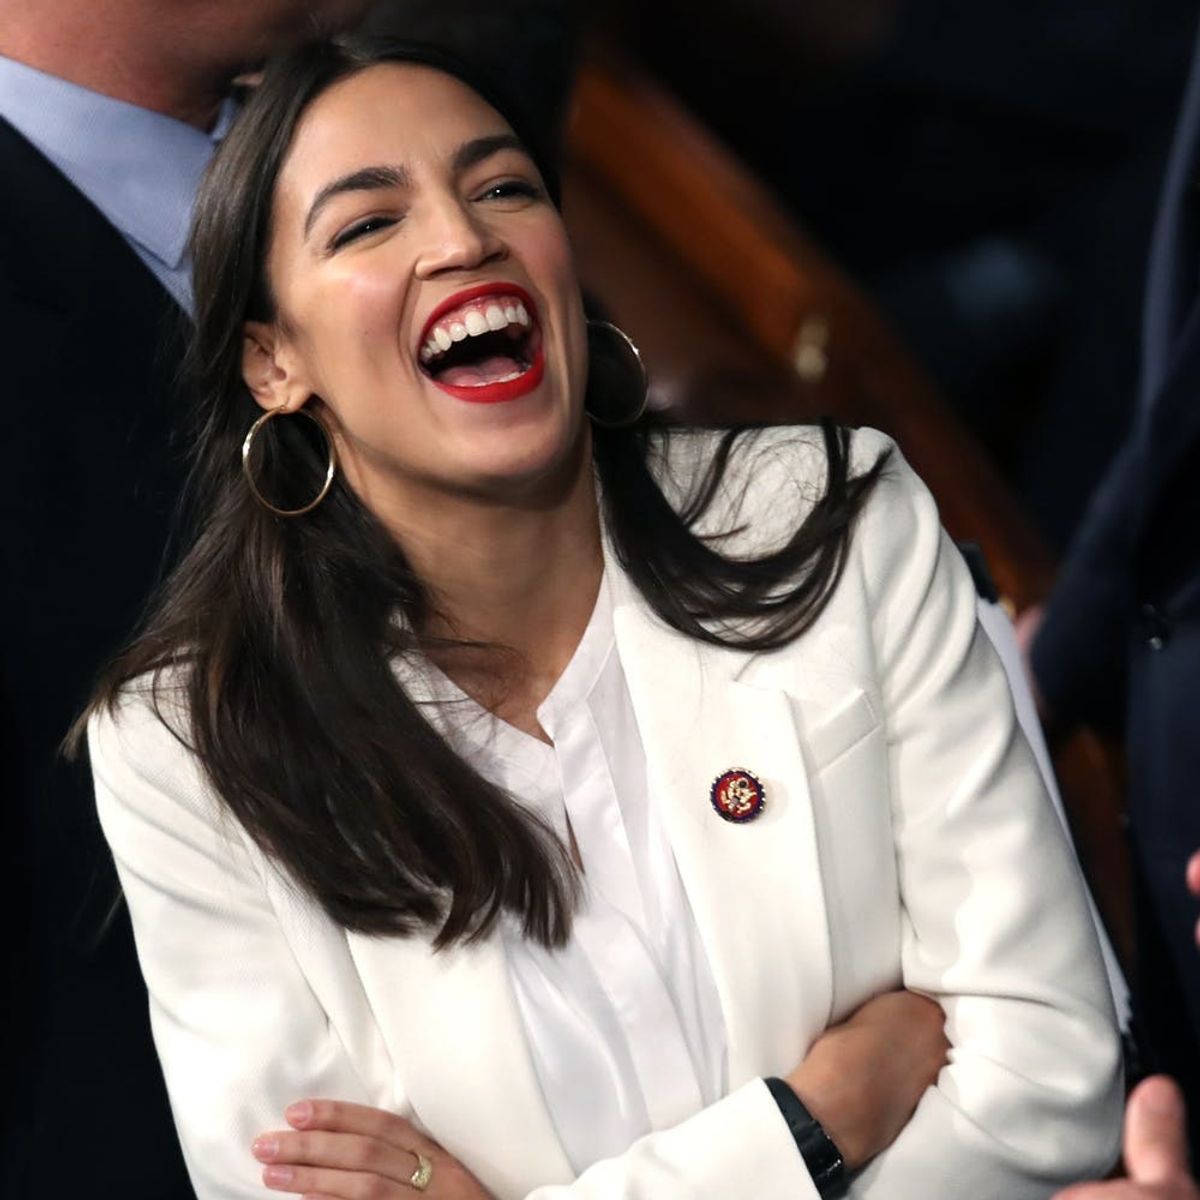 Alexandria Ocasio-Cortez Broke Party Ranks to Stand by Her Principles